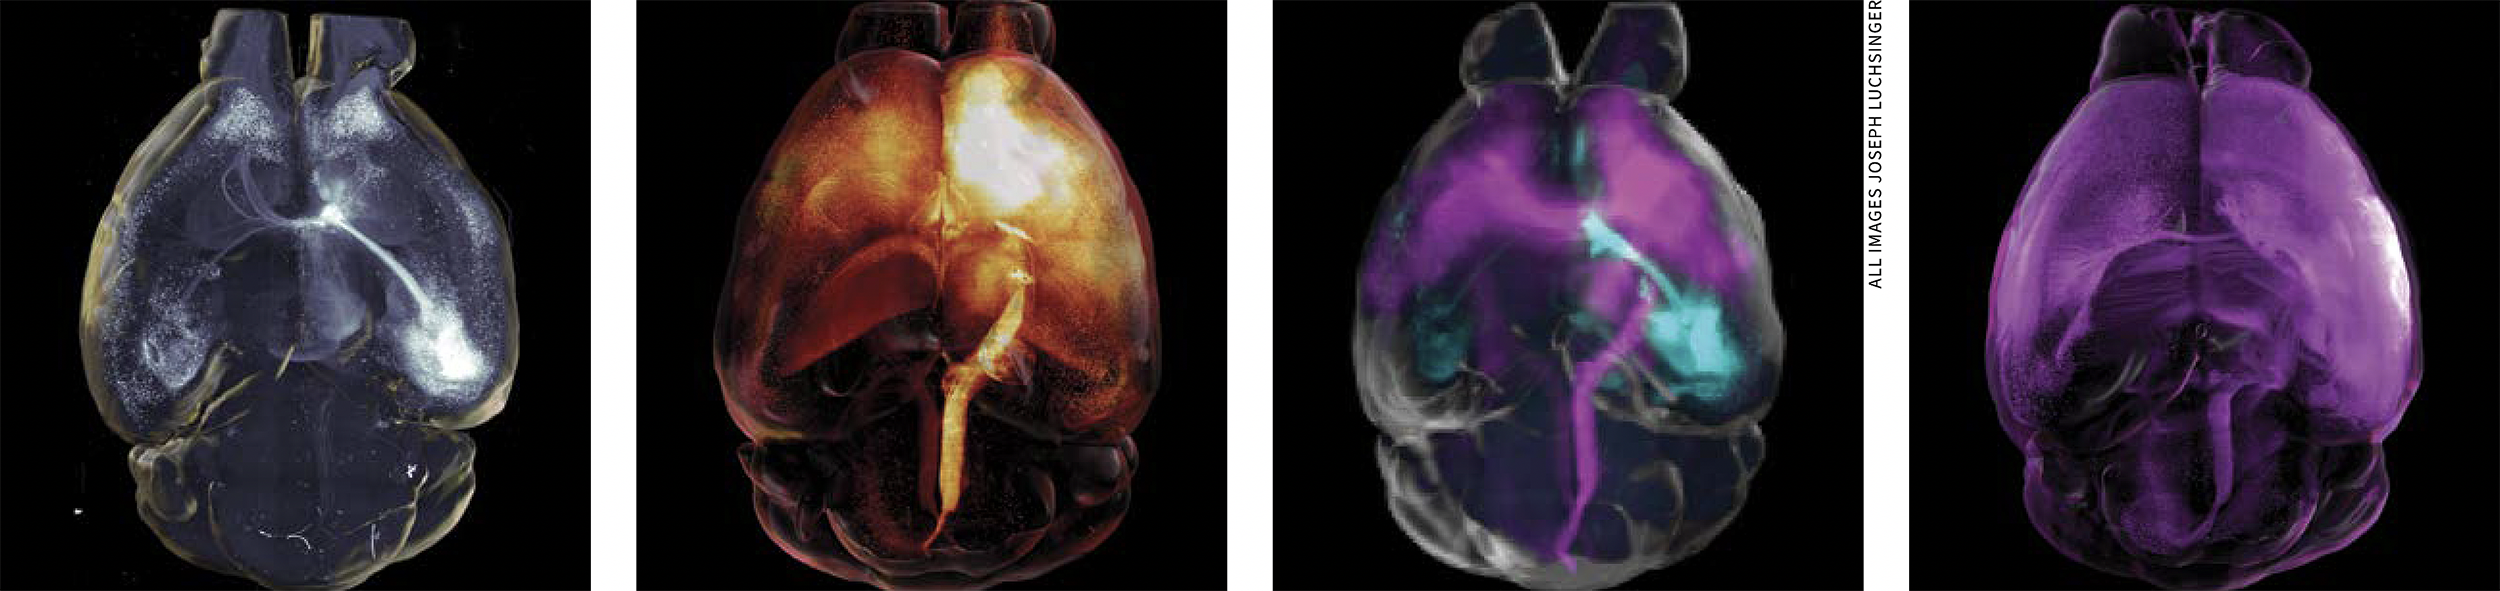 Four images of mouse brains that have been made transparent and that each glow with different colors and in different patters depending on what protein is labeled on each one. From left to right, the brains have silver, orange, purple/cyan, and purple coloring.